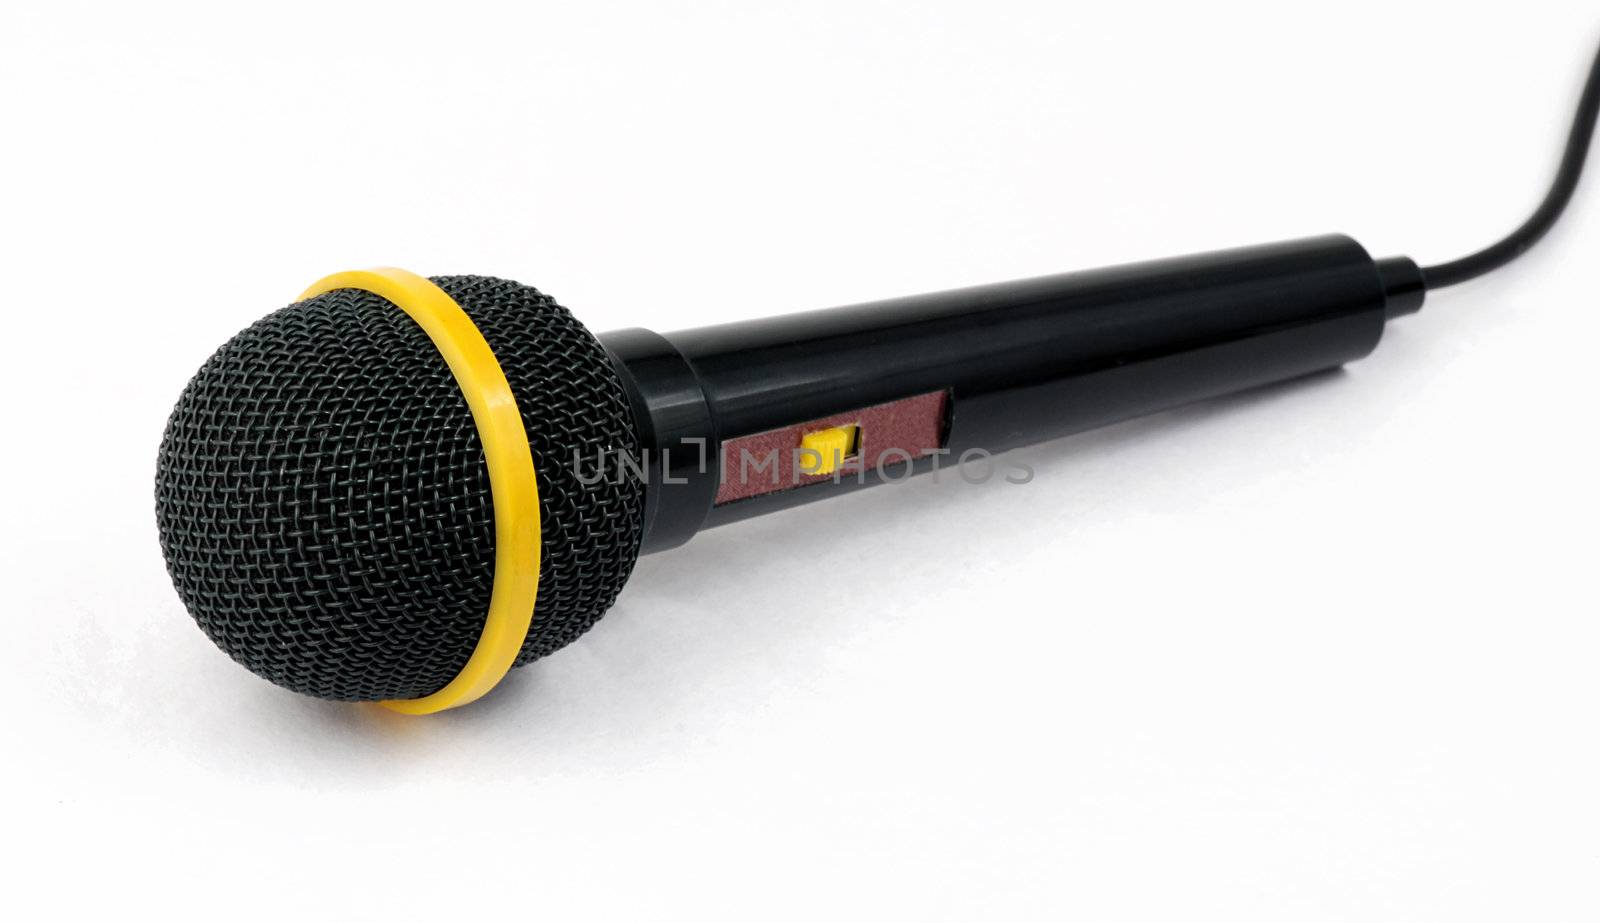 Black microphone for singing isolated on white background

